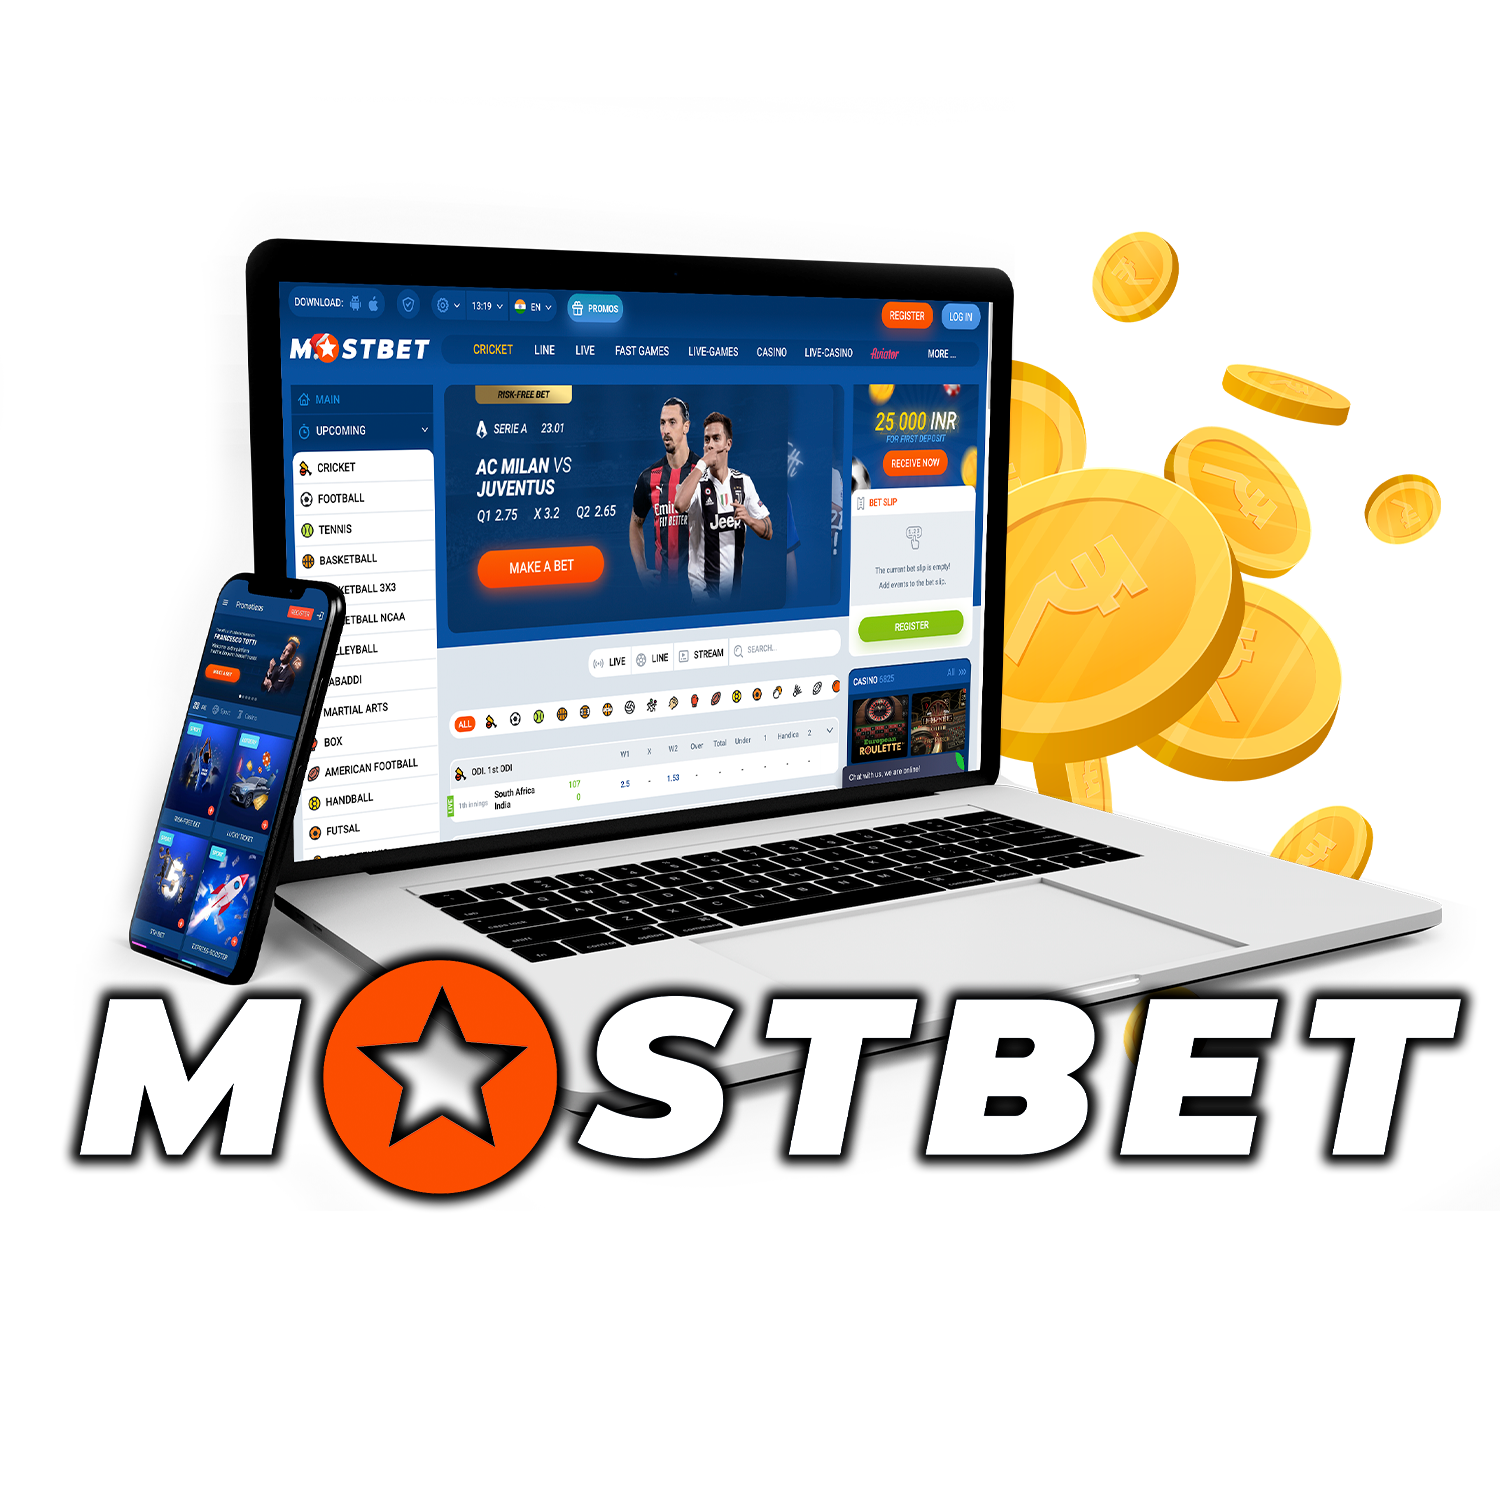 How To Guide: Mostbet Online Bookmaker and Casino in Turkey Essentials For Beginners